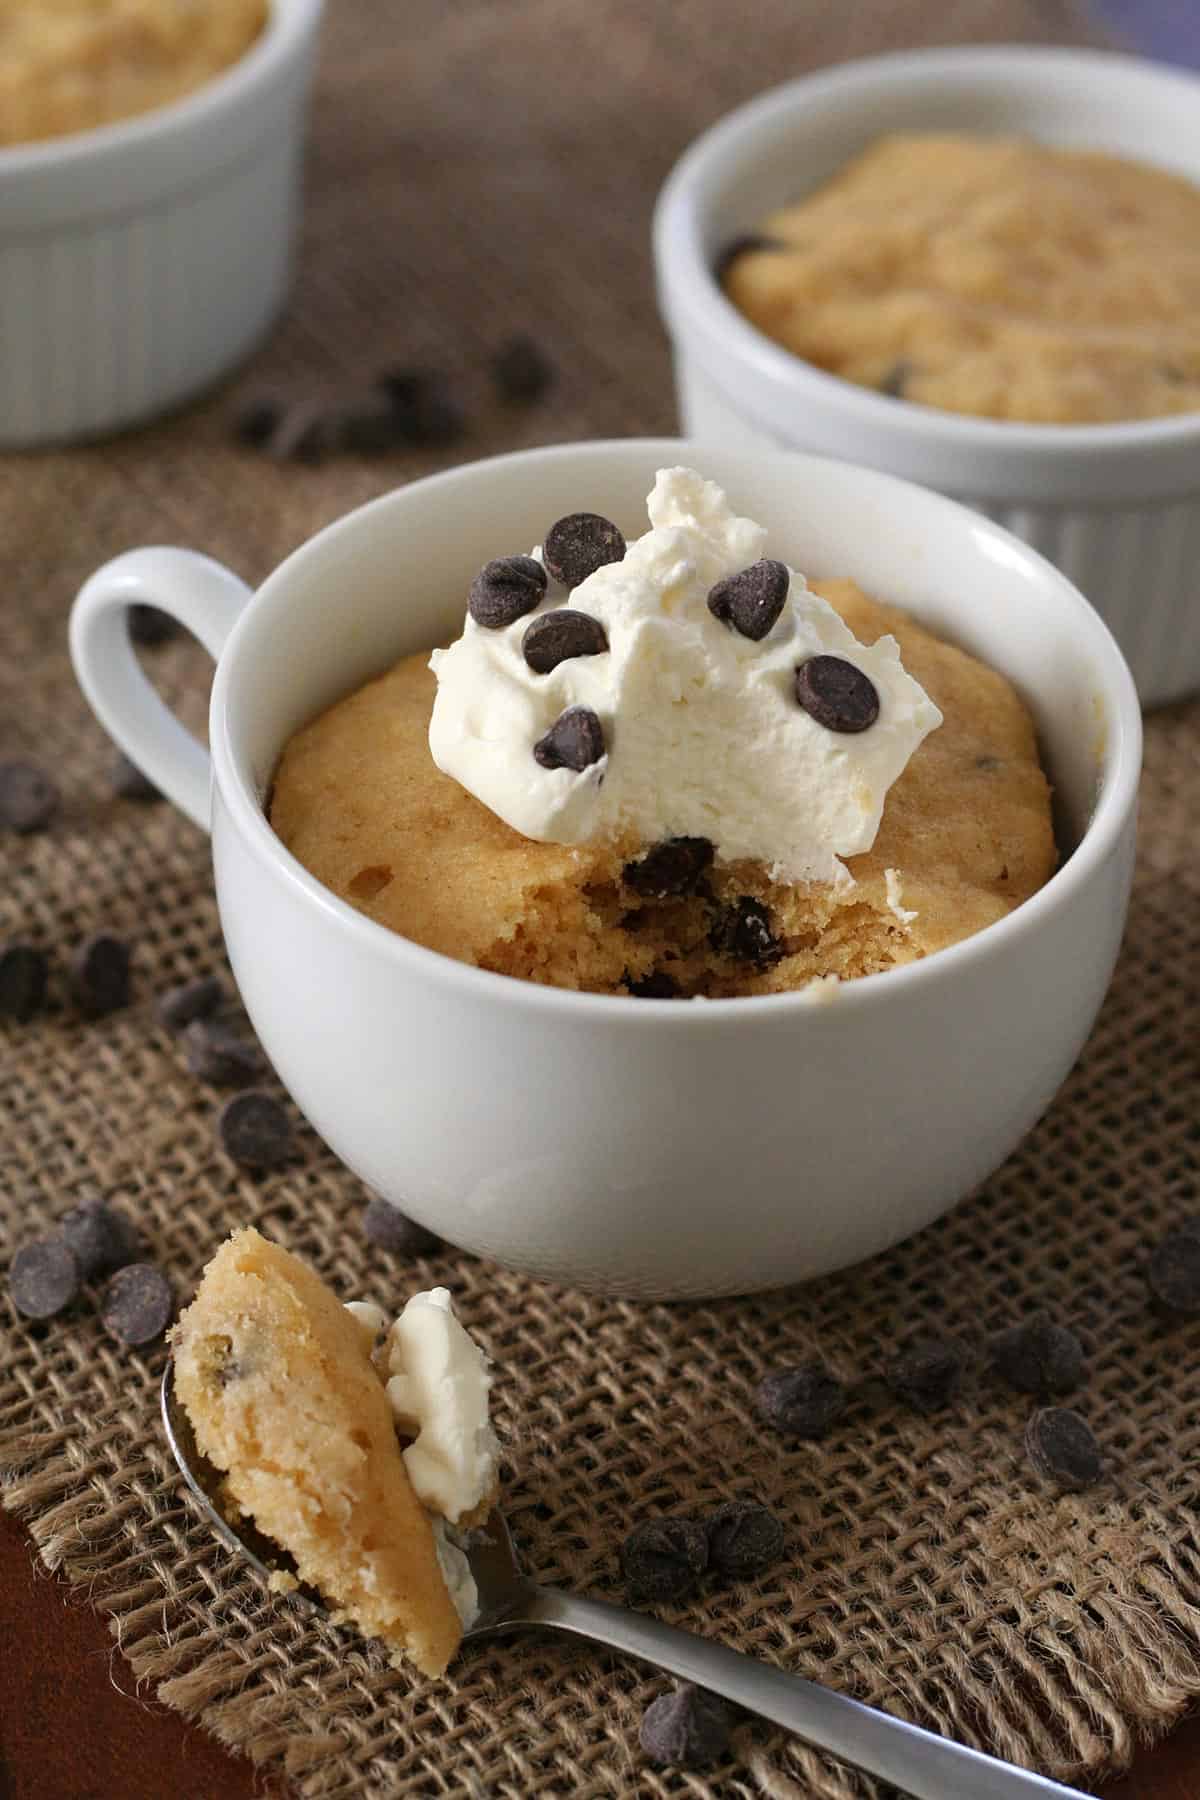 A keto mug cake in a white mug with chocolate chips strewn around and a spoonful taken out of it.